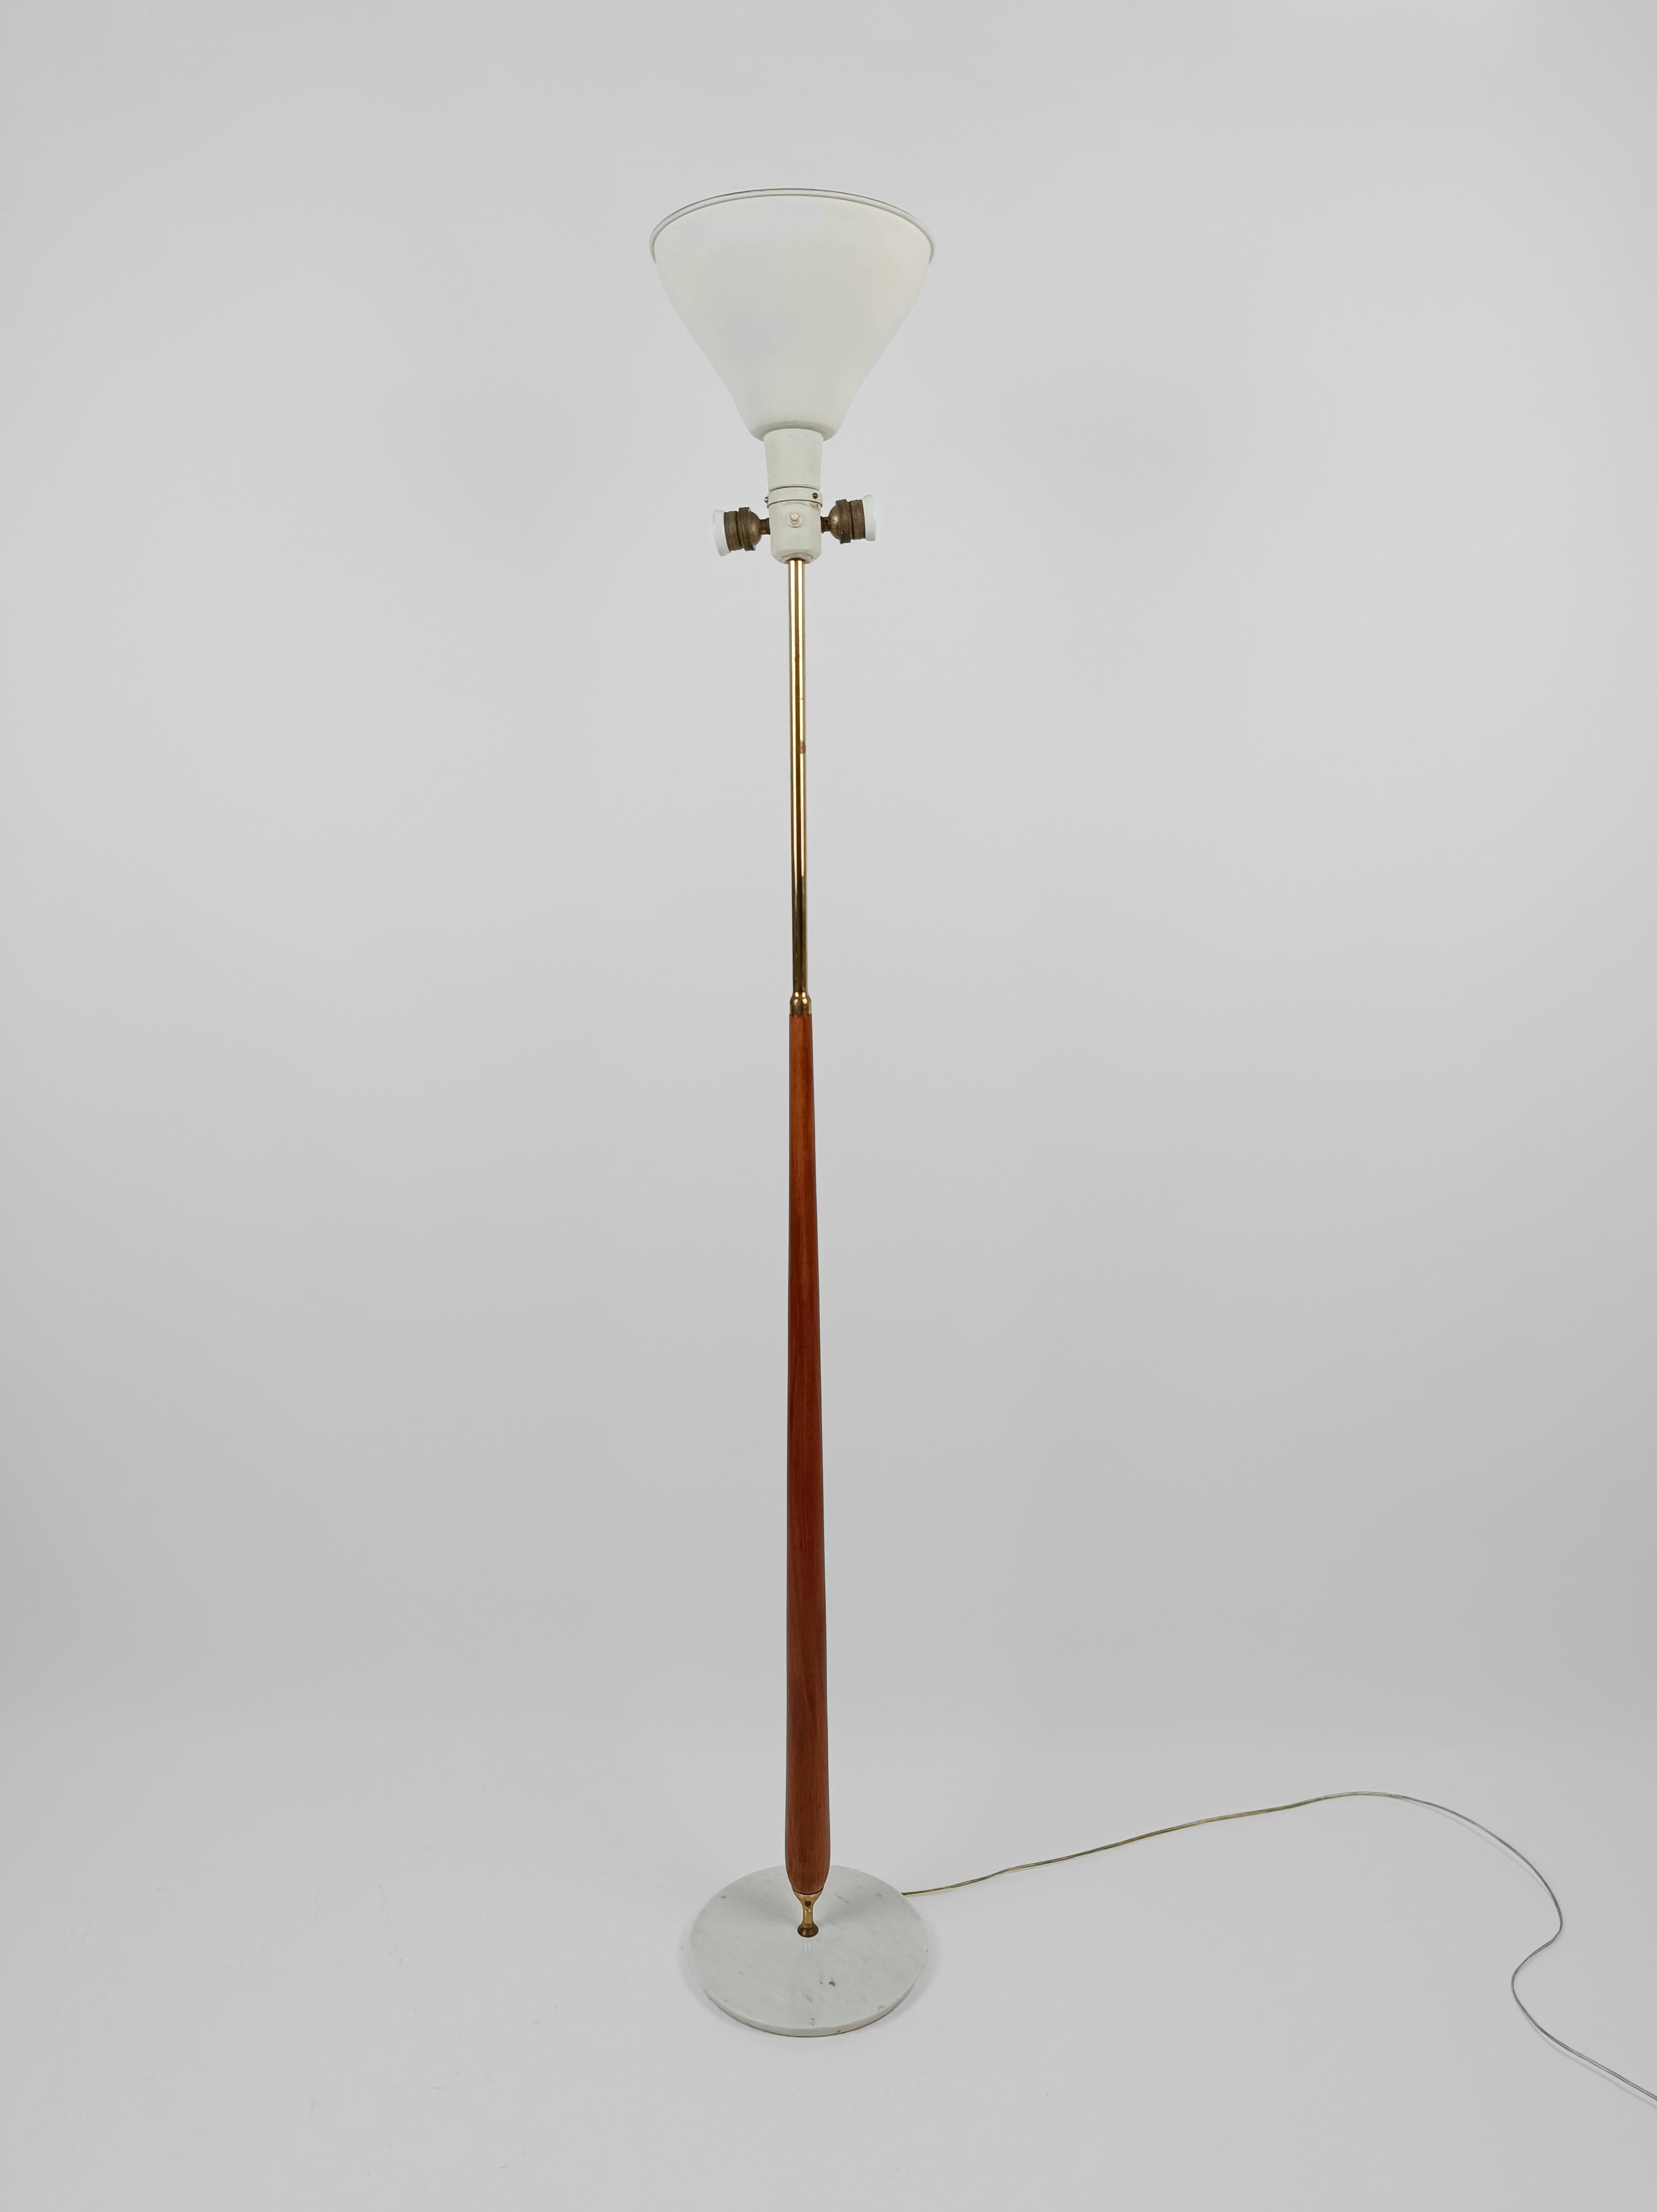 Italian Mid Century Floor Lamp in Solid Wood, Carrara Marble and Brass, 1950s For Sale 1